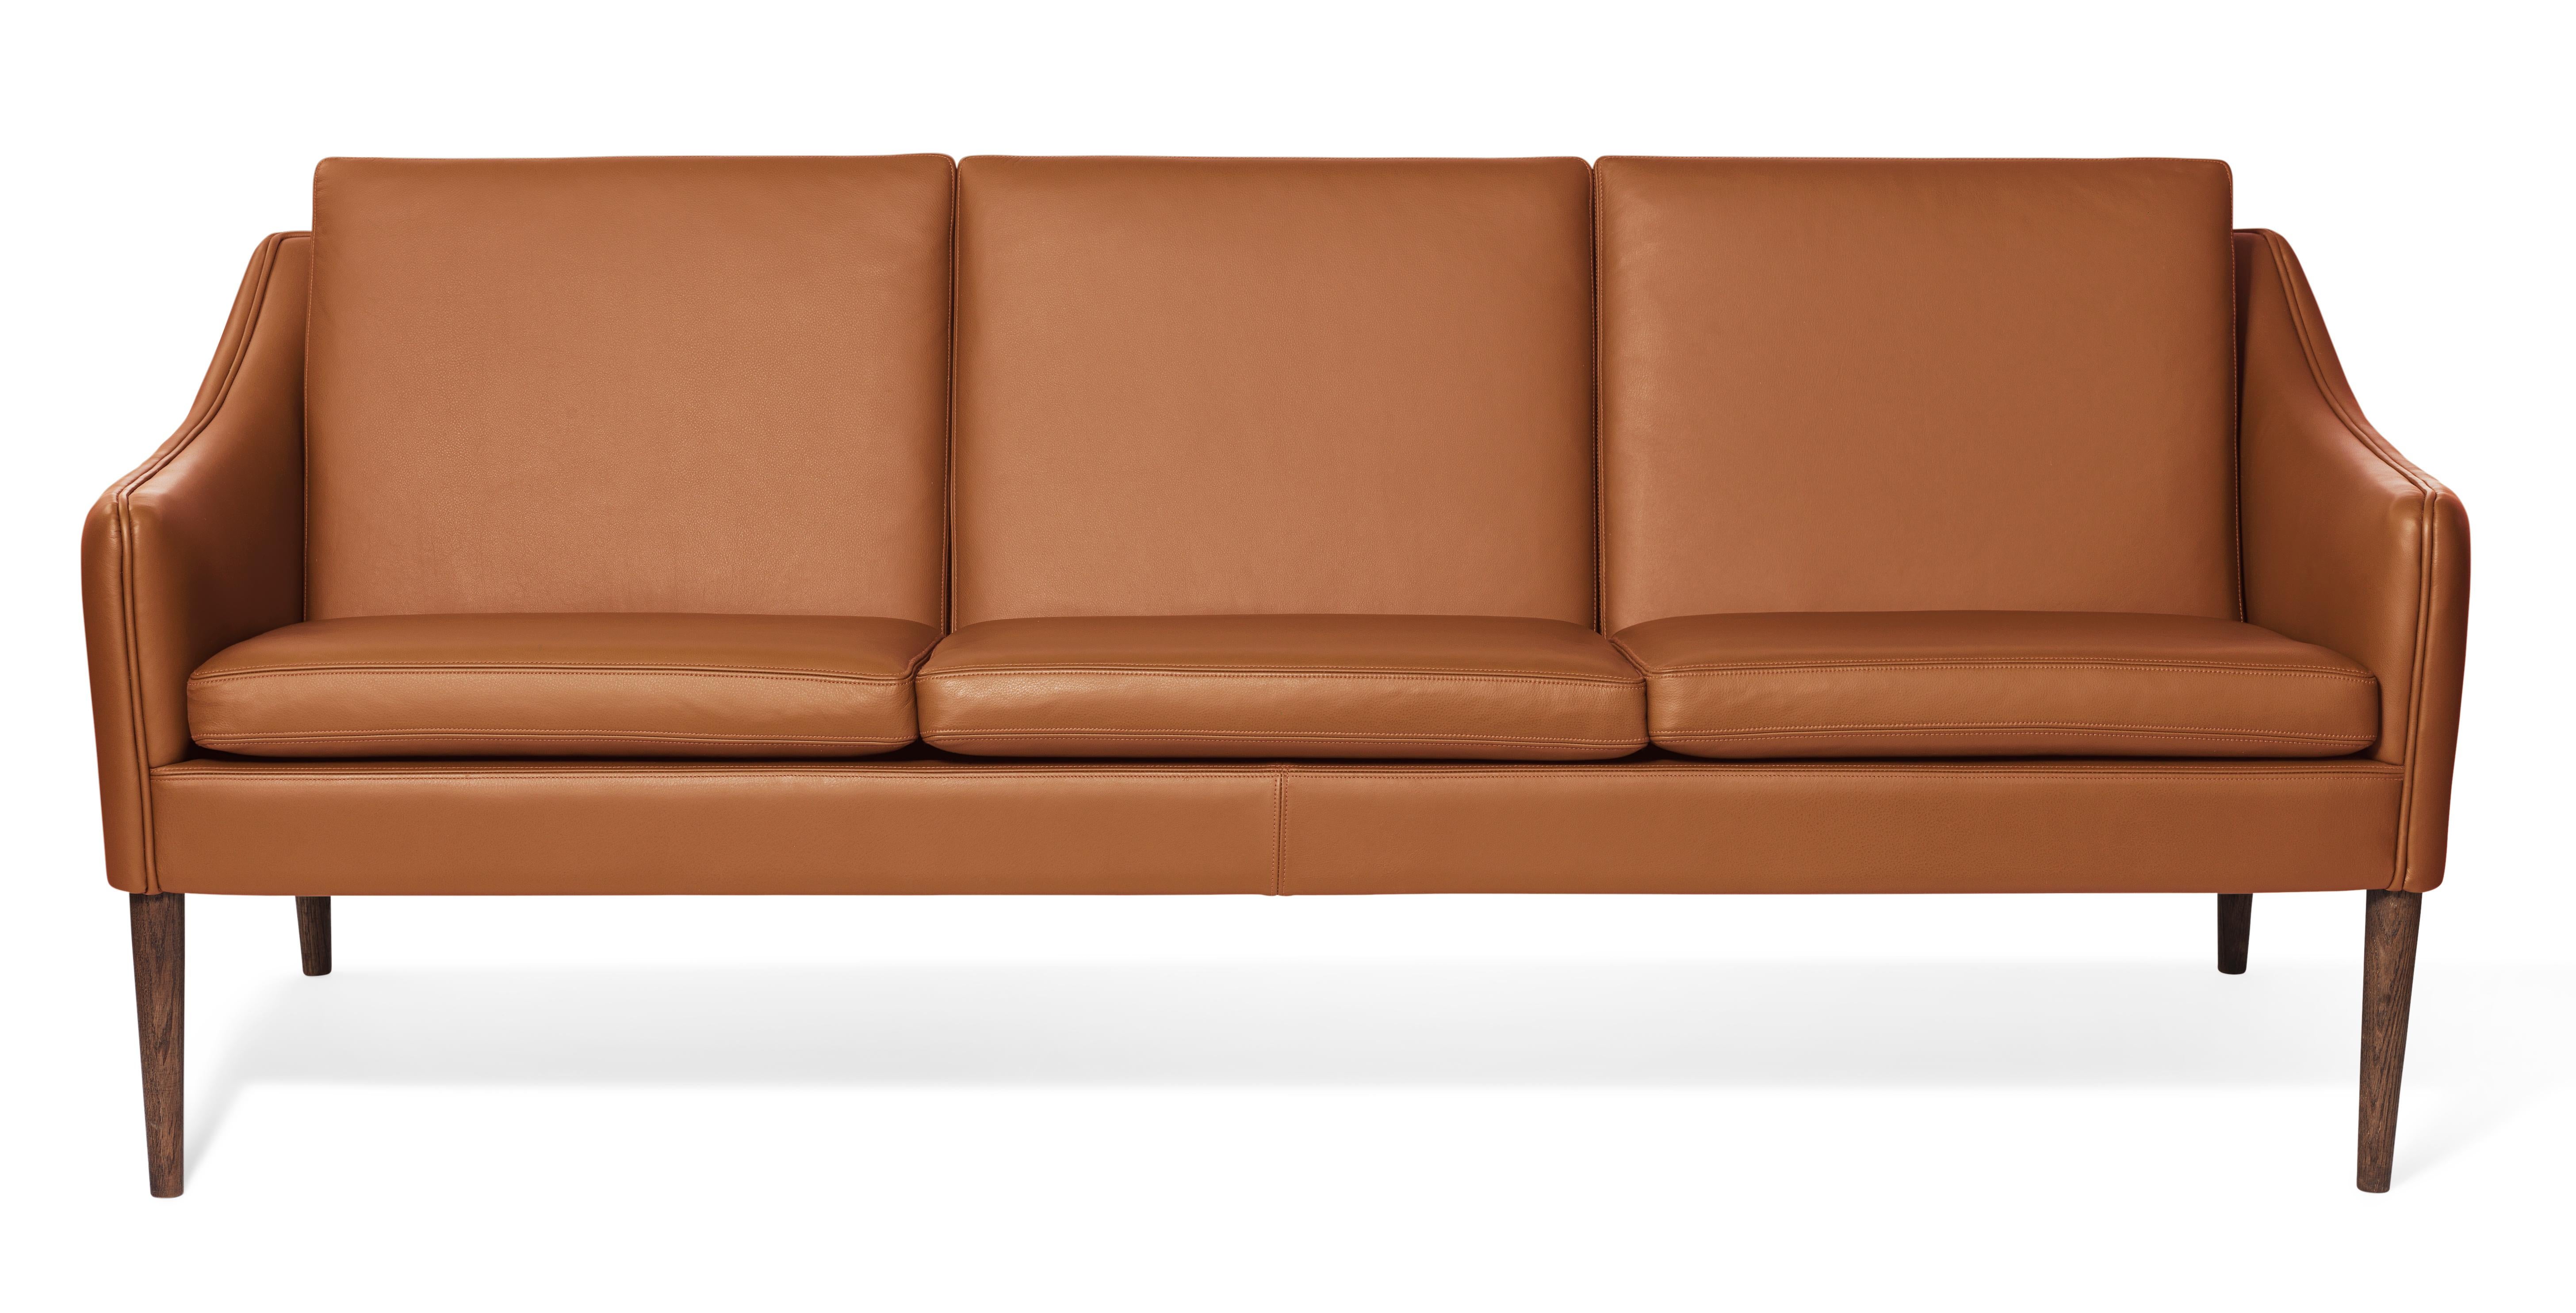 For Sale: Brown (Challenger Cognac) Mr. Olsen 3-Seat Sofa with Smoked Oak Legs, by Hans Olsen from Warm Nordic